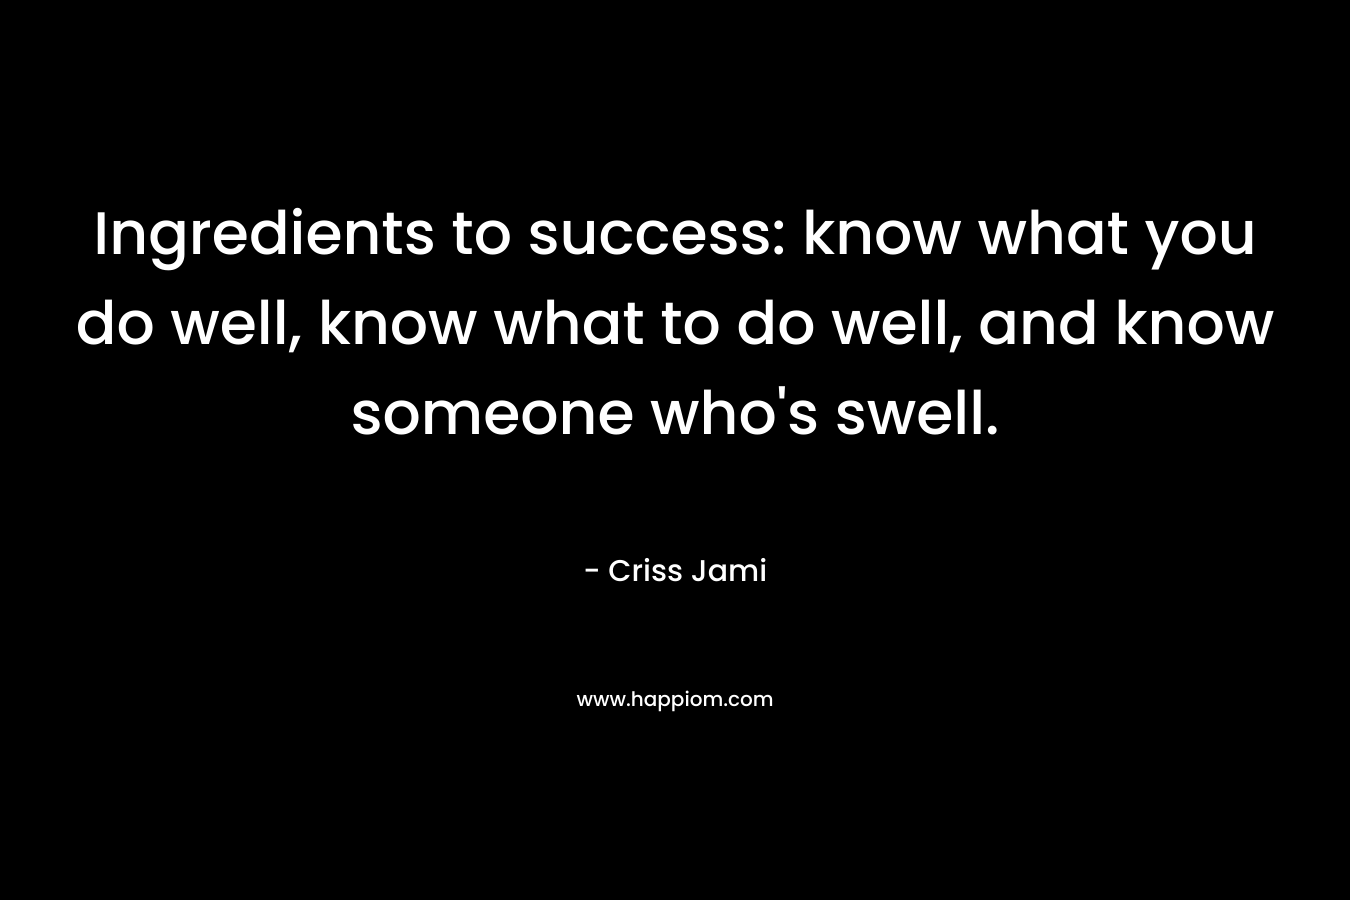 Ingredients to success: know what you do well, know what to do well, and know someone who's swell.